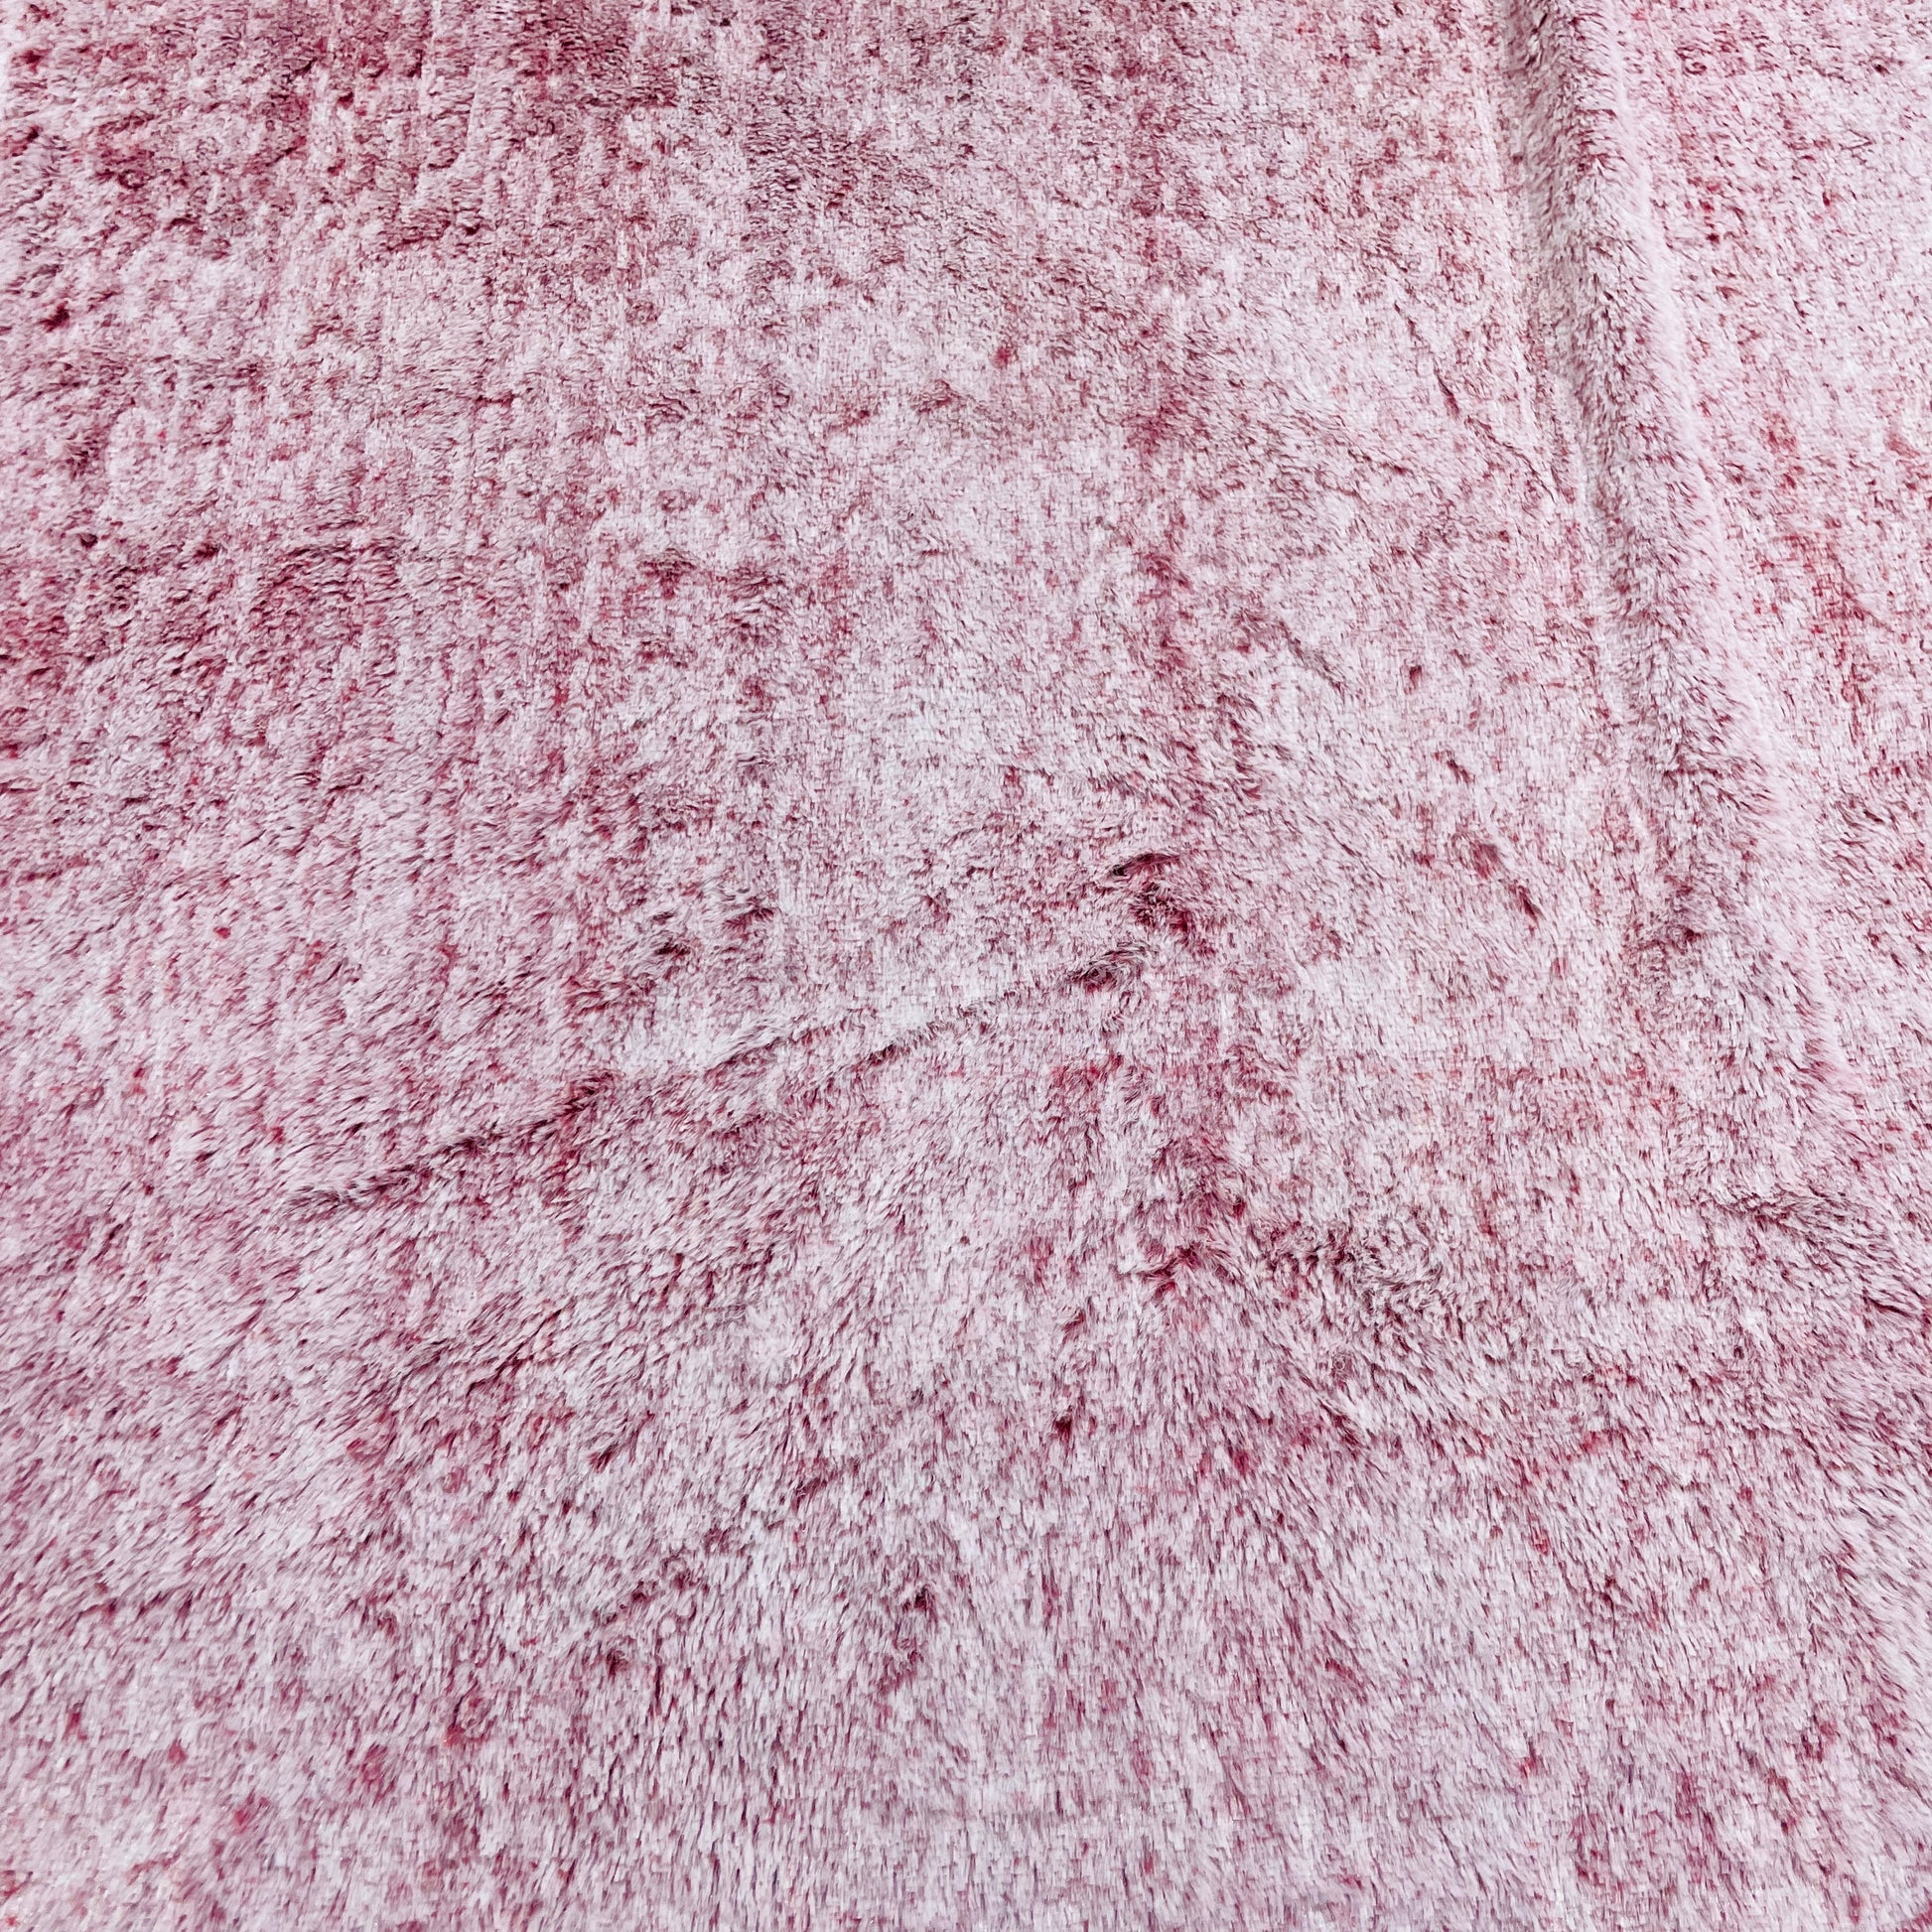 Red & White Solid Fur Fabric - TradeUNO